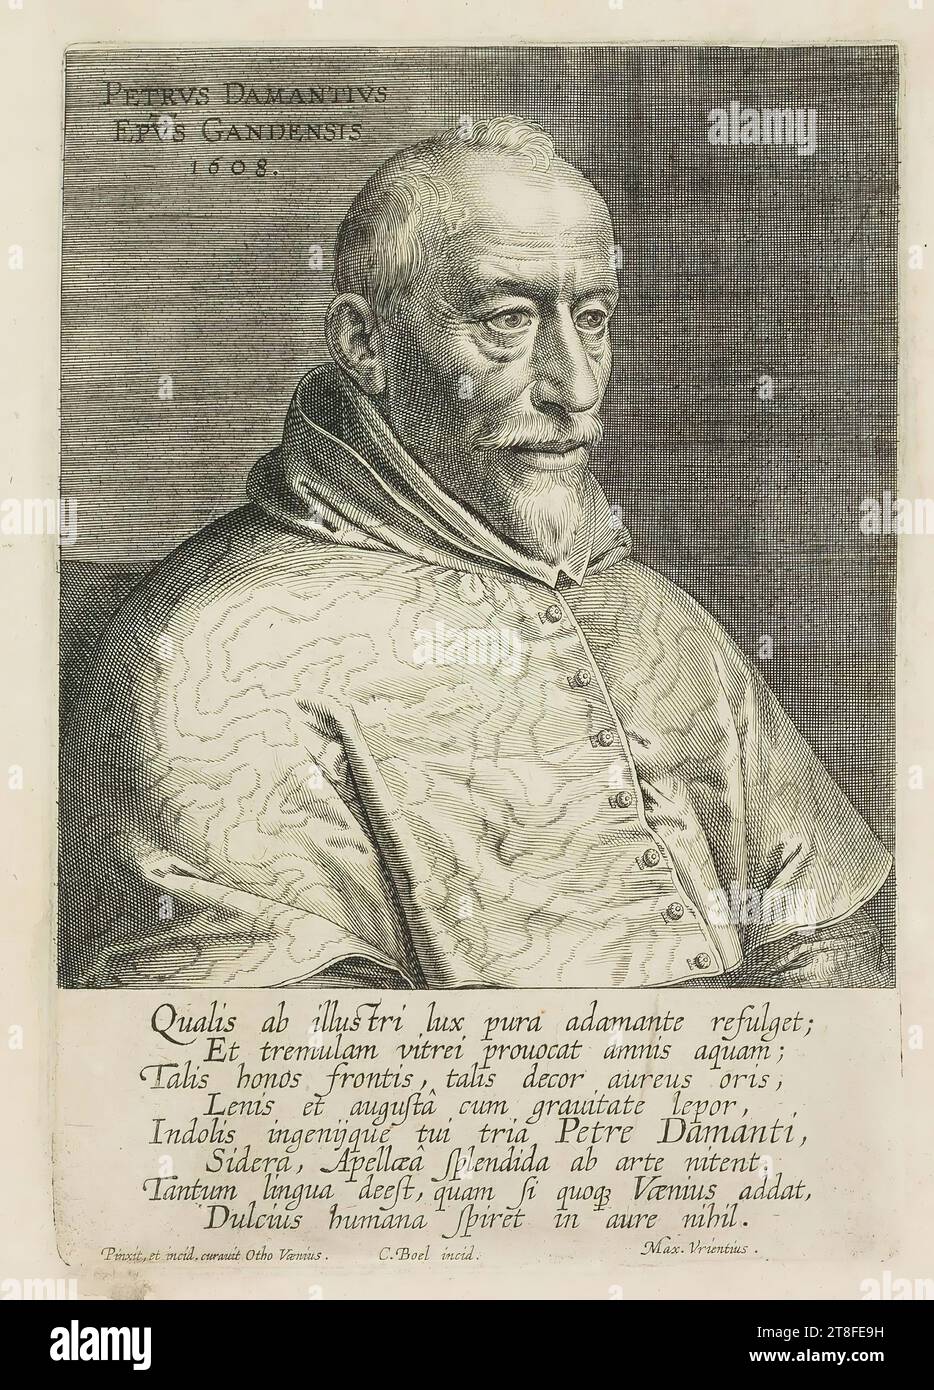 PETRVS DAMANTIVS, EPUS GANDENSIS, 1608. As from a illustrious light shines pure diamond; , Apellæa shines splendidly from art. The language is so lacking, that if any Vænius adds, Sweet human breaths nothing in the ear. He painted, and incod. Vænius took care of it. C. Boel incident. Max. Vrientius Stock Photo